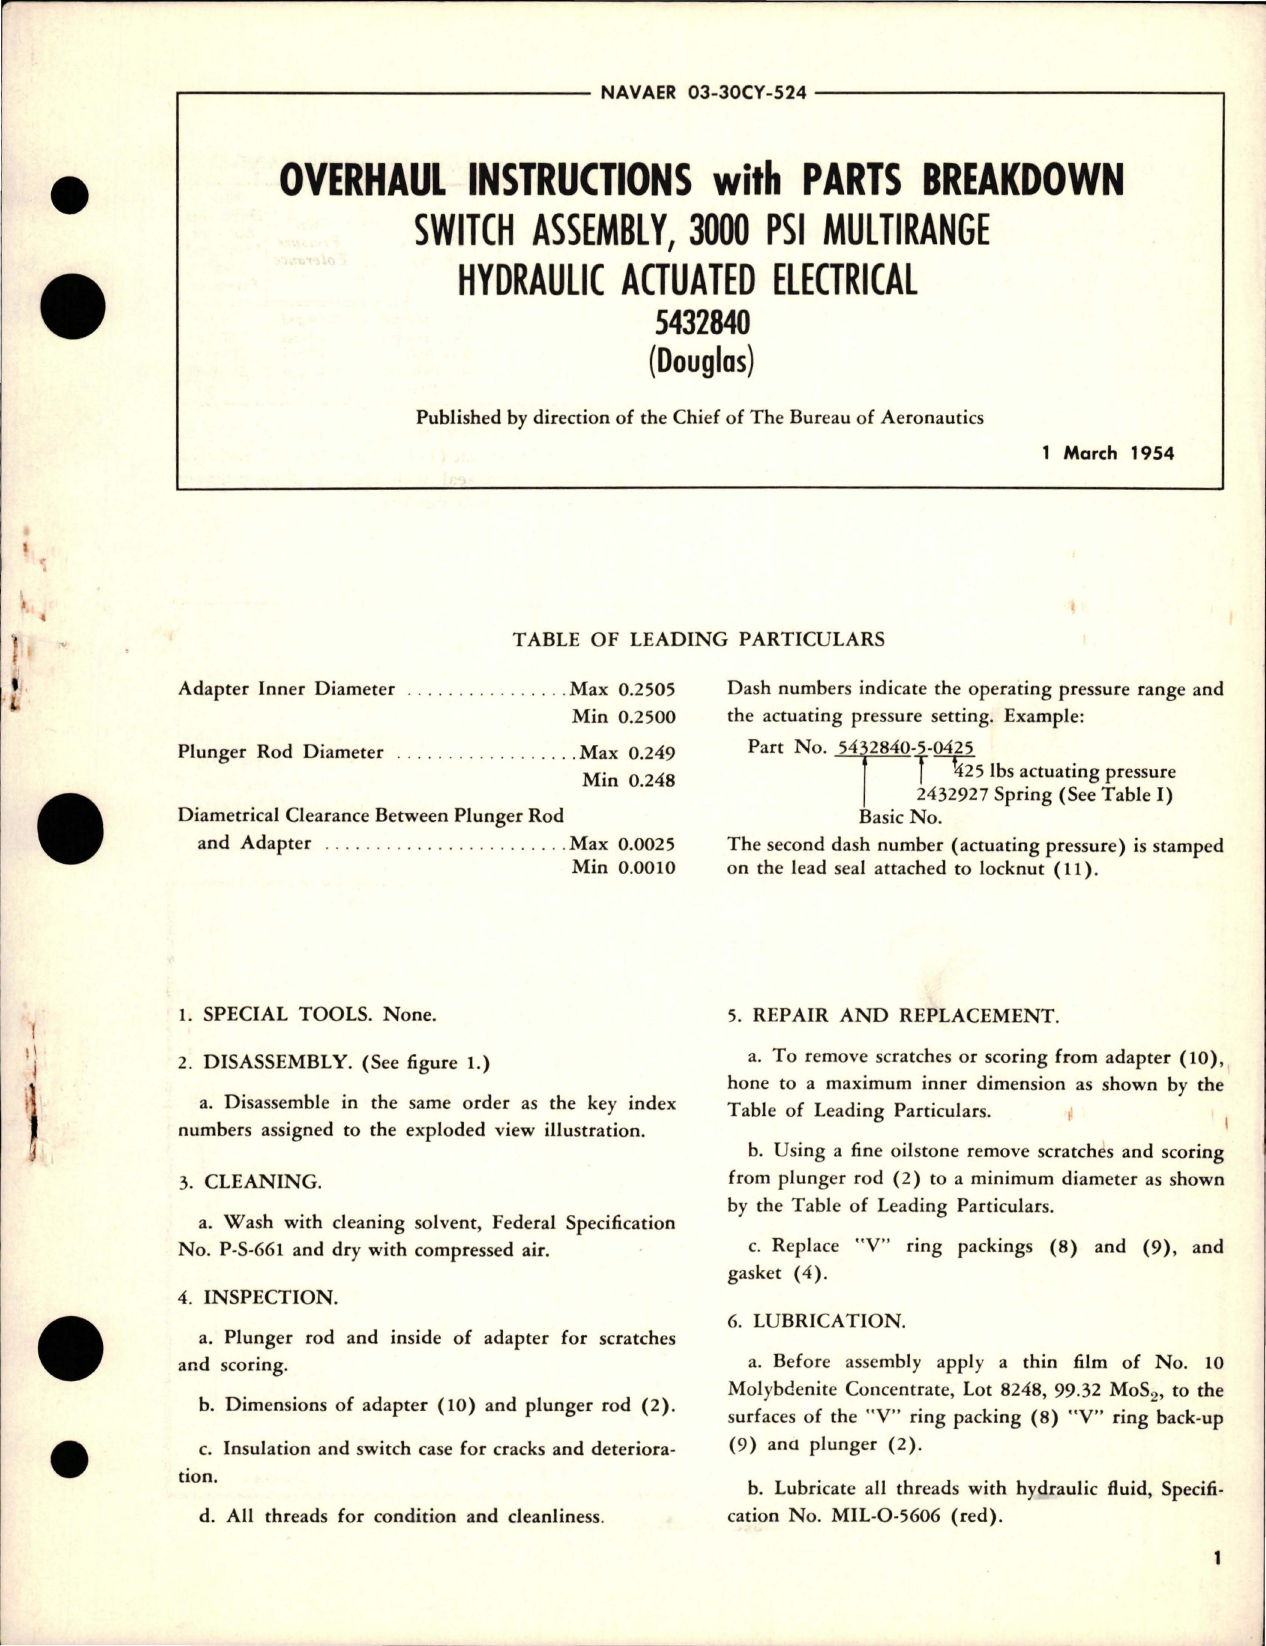 Sample page 1 from AirCorps Library document: Overhaul Instructions with Parts for 3000 PSI Multirange Hydraulic Actuated Electrical Switch Assembly - 5432840 